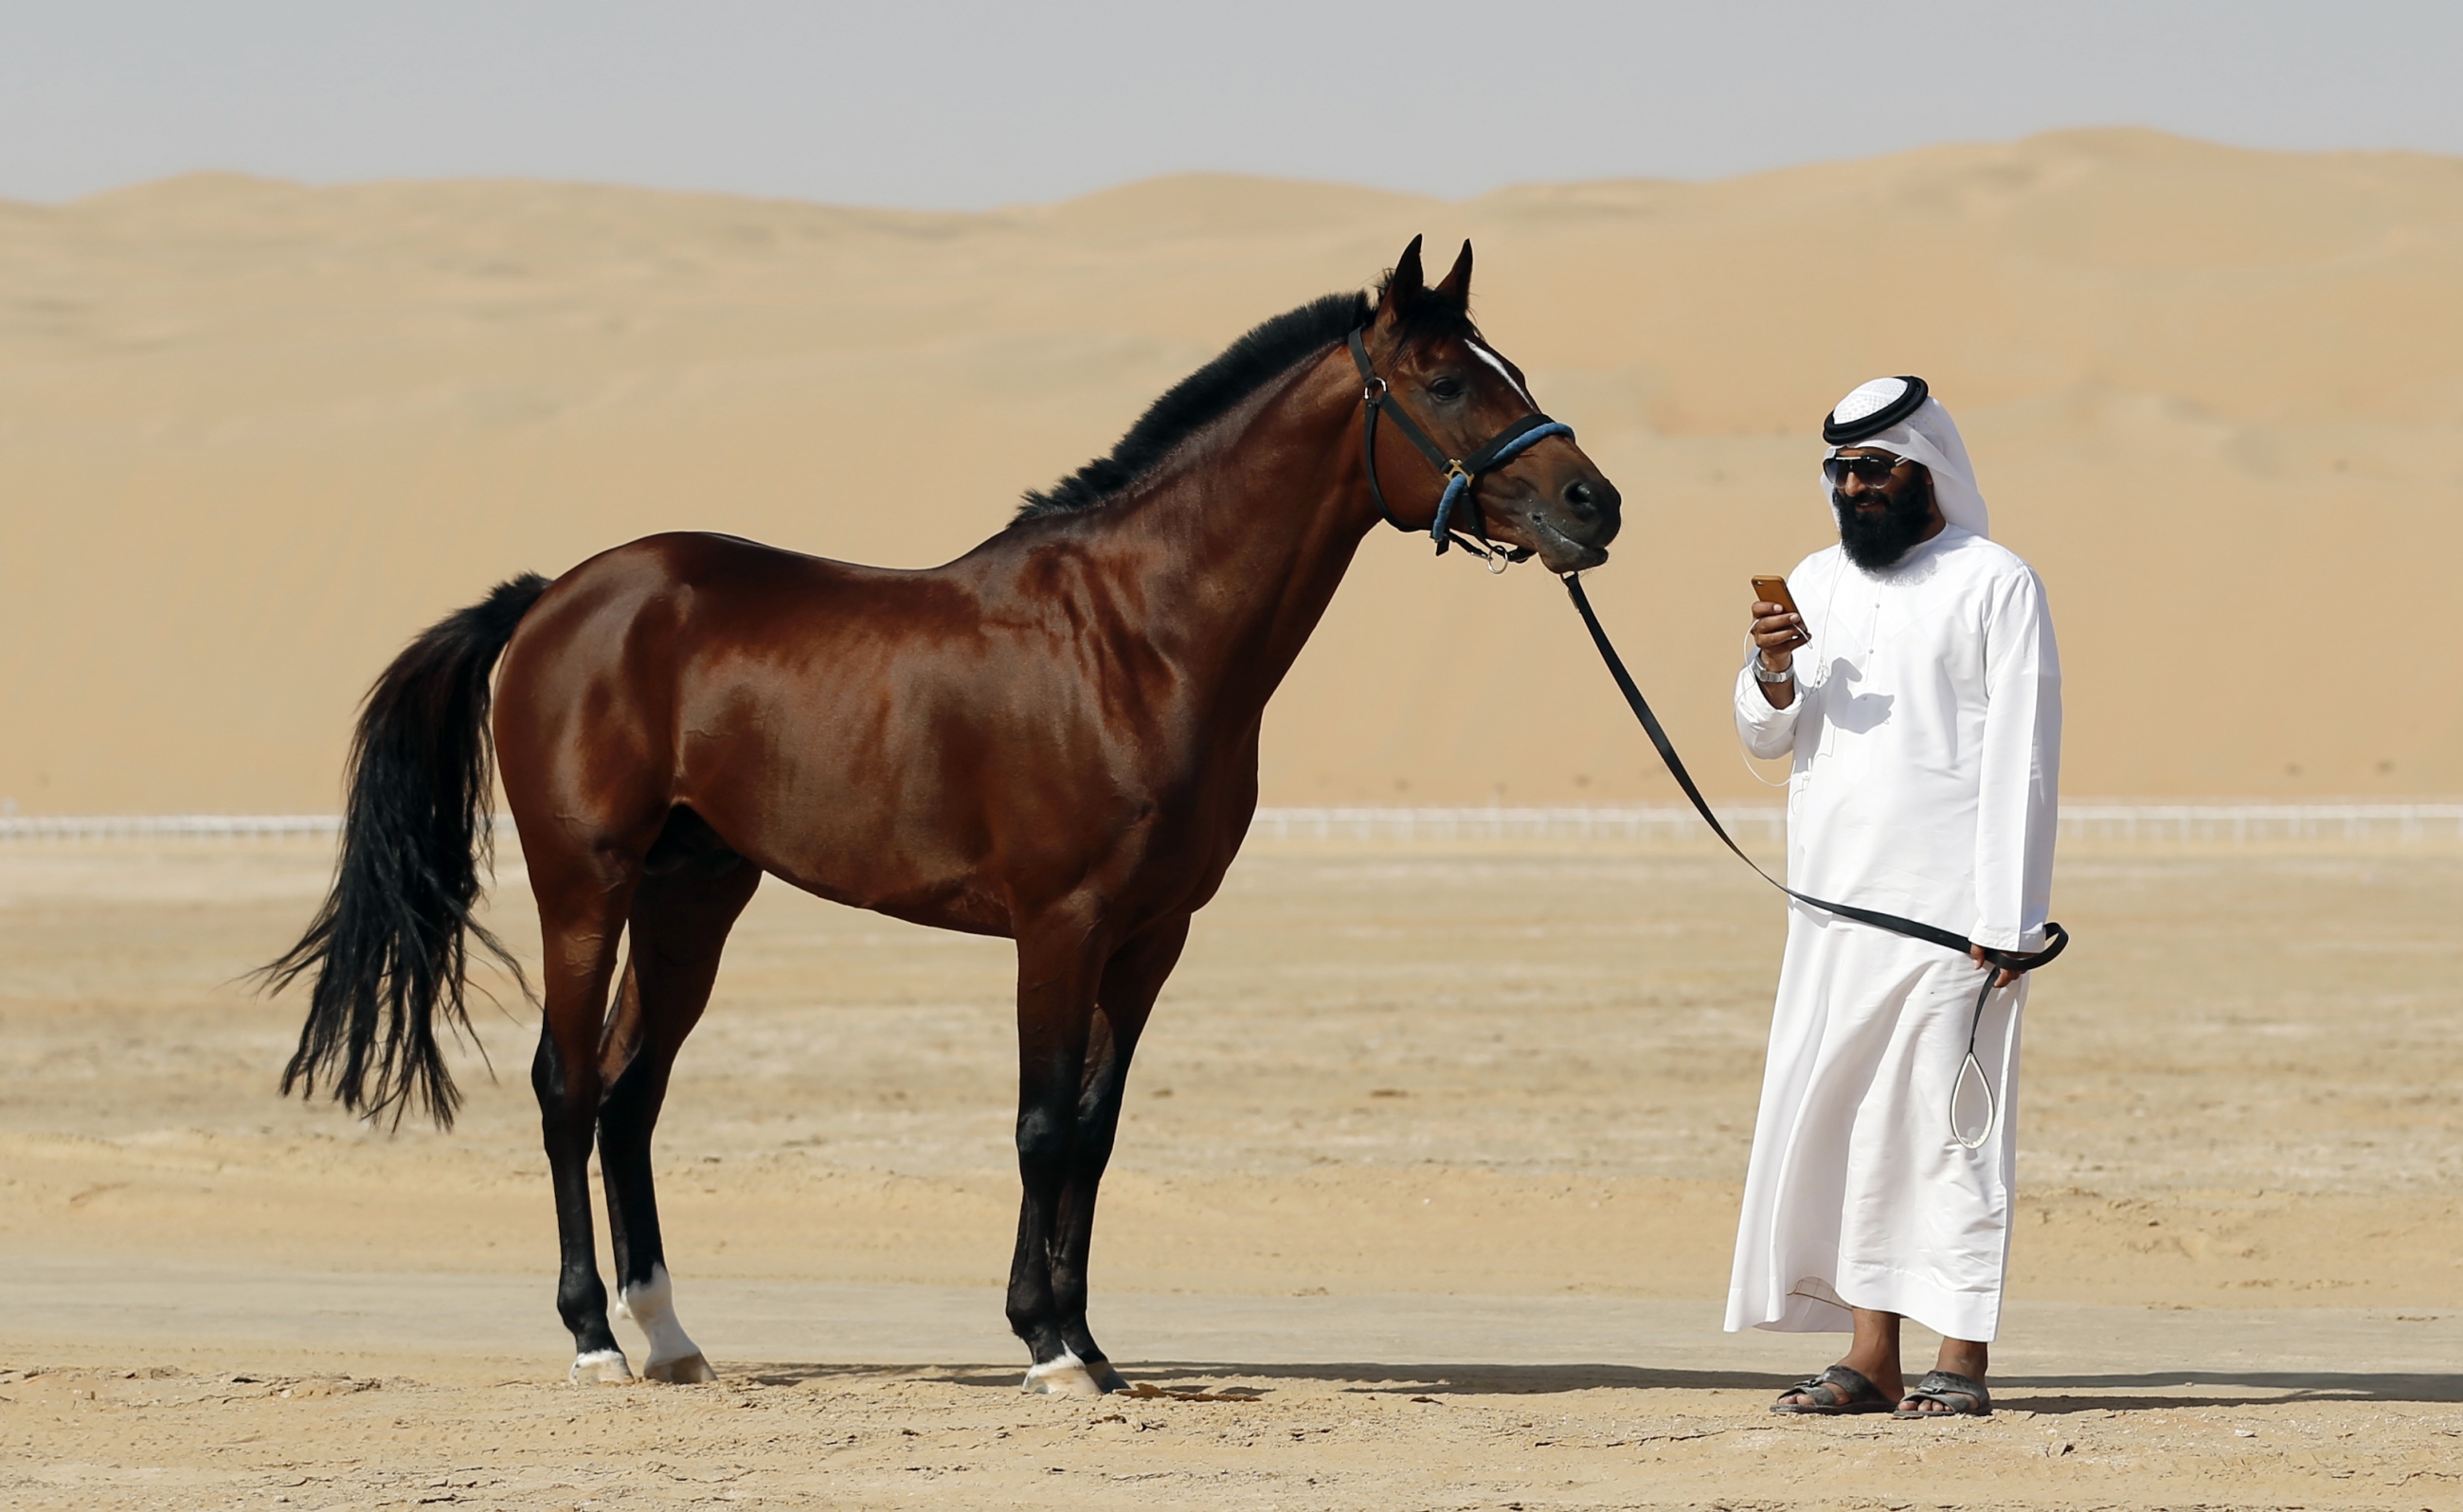 An Emirati looks at his phone as he leads his Arab horse during the Liwa 2014 Moreeb Dune Festival in January 2014, close to the border with Saudi Arabia (AFP)